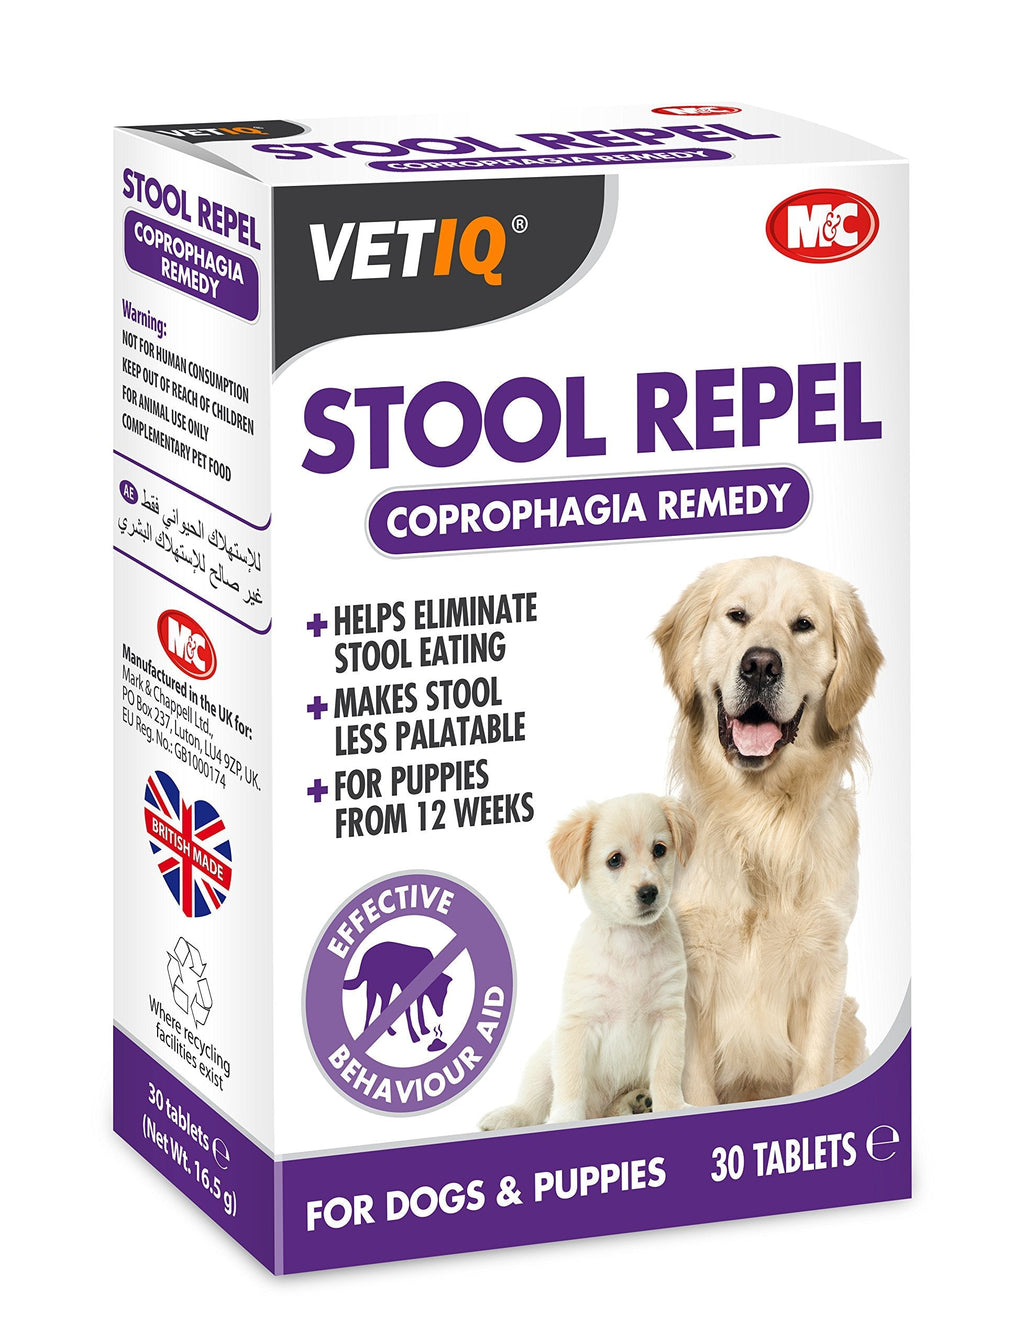 VetIQ Stool Repel Coprophagia Aid, 30 Tablets, Pet Supplement Helps Eliminate Stool Eating, Dog Stool Repellant Makes Stool Less Palatable, For Puppies 12 Weeks and Up - PawsPlanet Australia